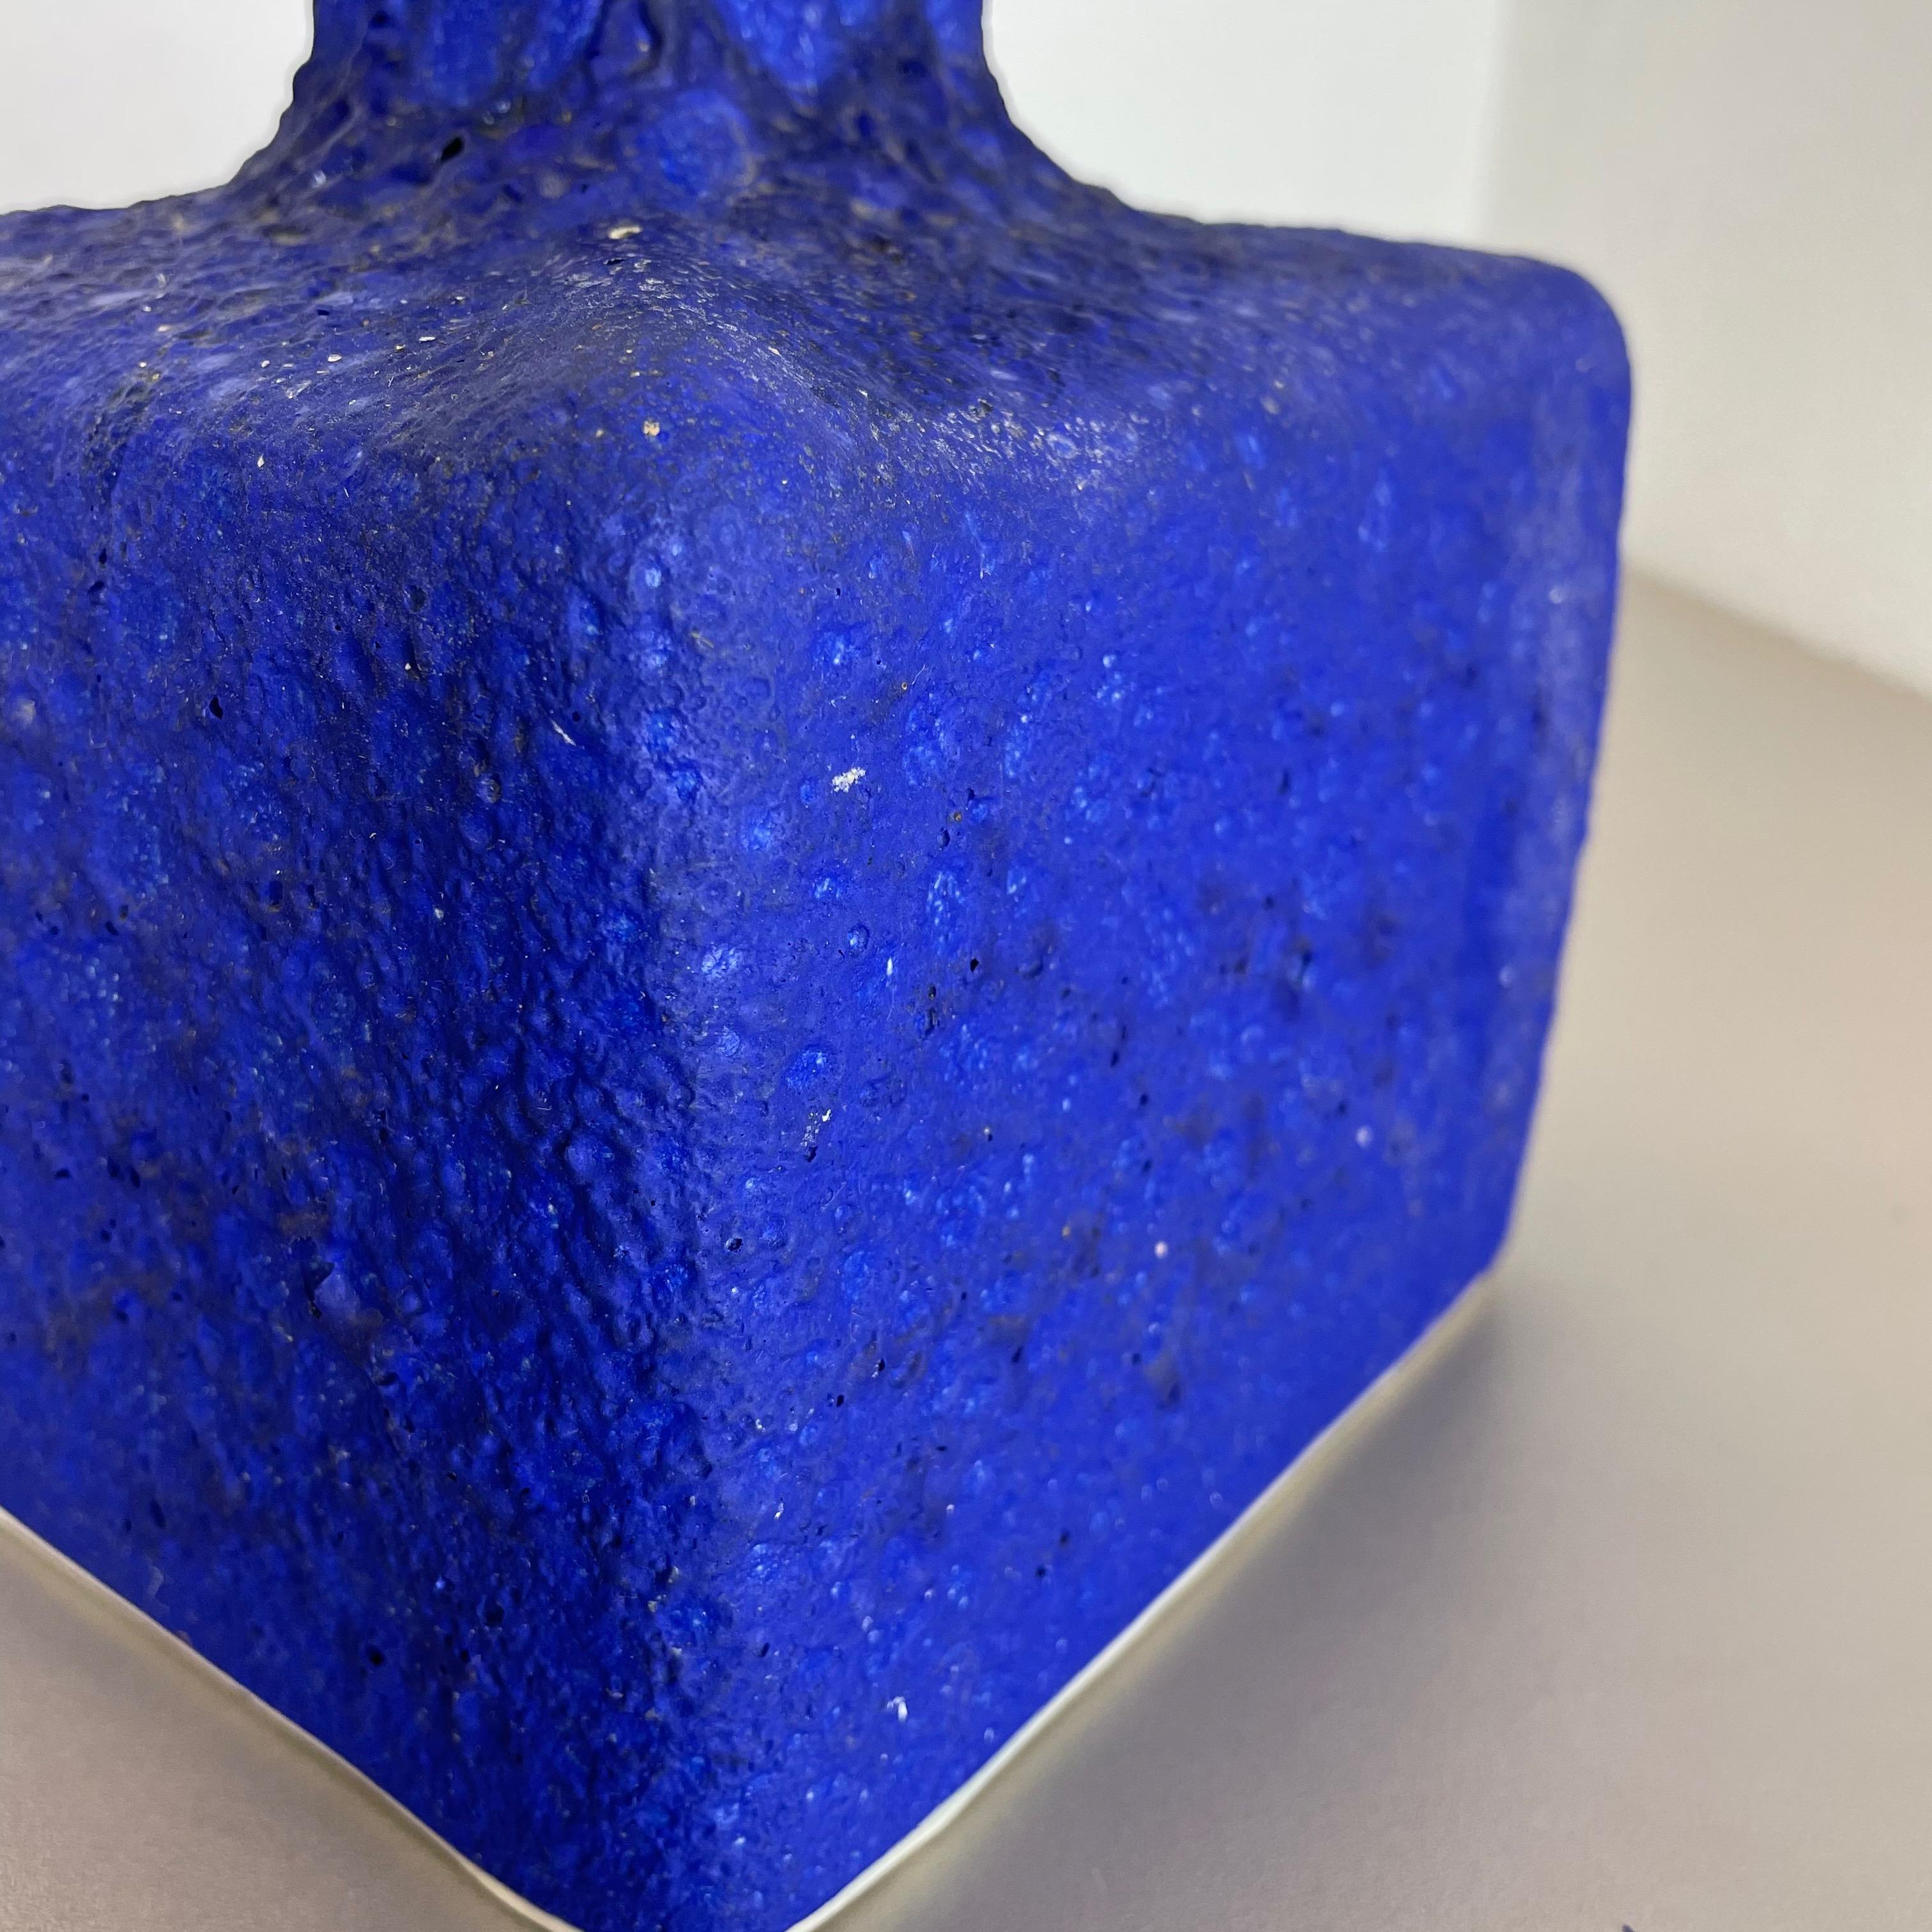 Mid-Century Modern Abstract Colorful Pottery Blue Cube Vase Made by Silberdistel, W. Germany, 1950s